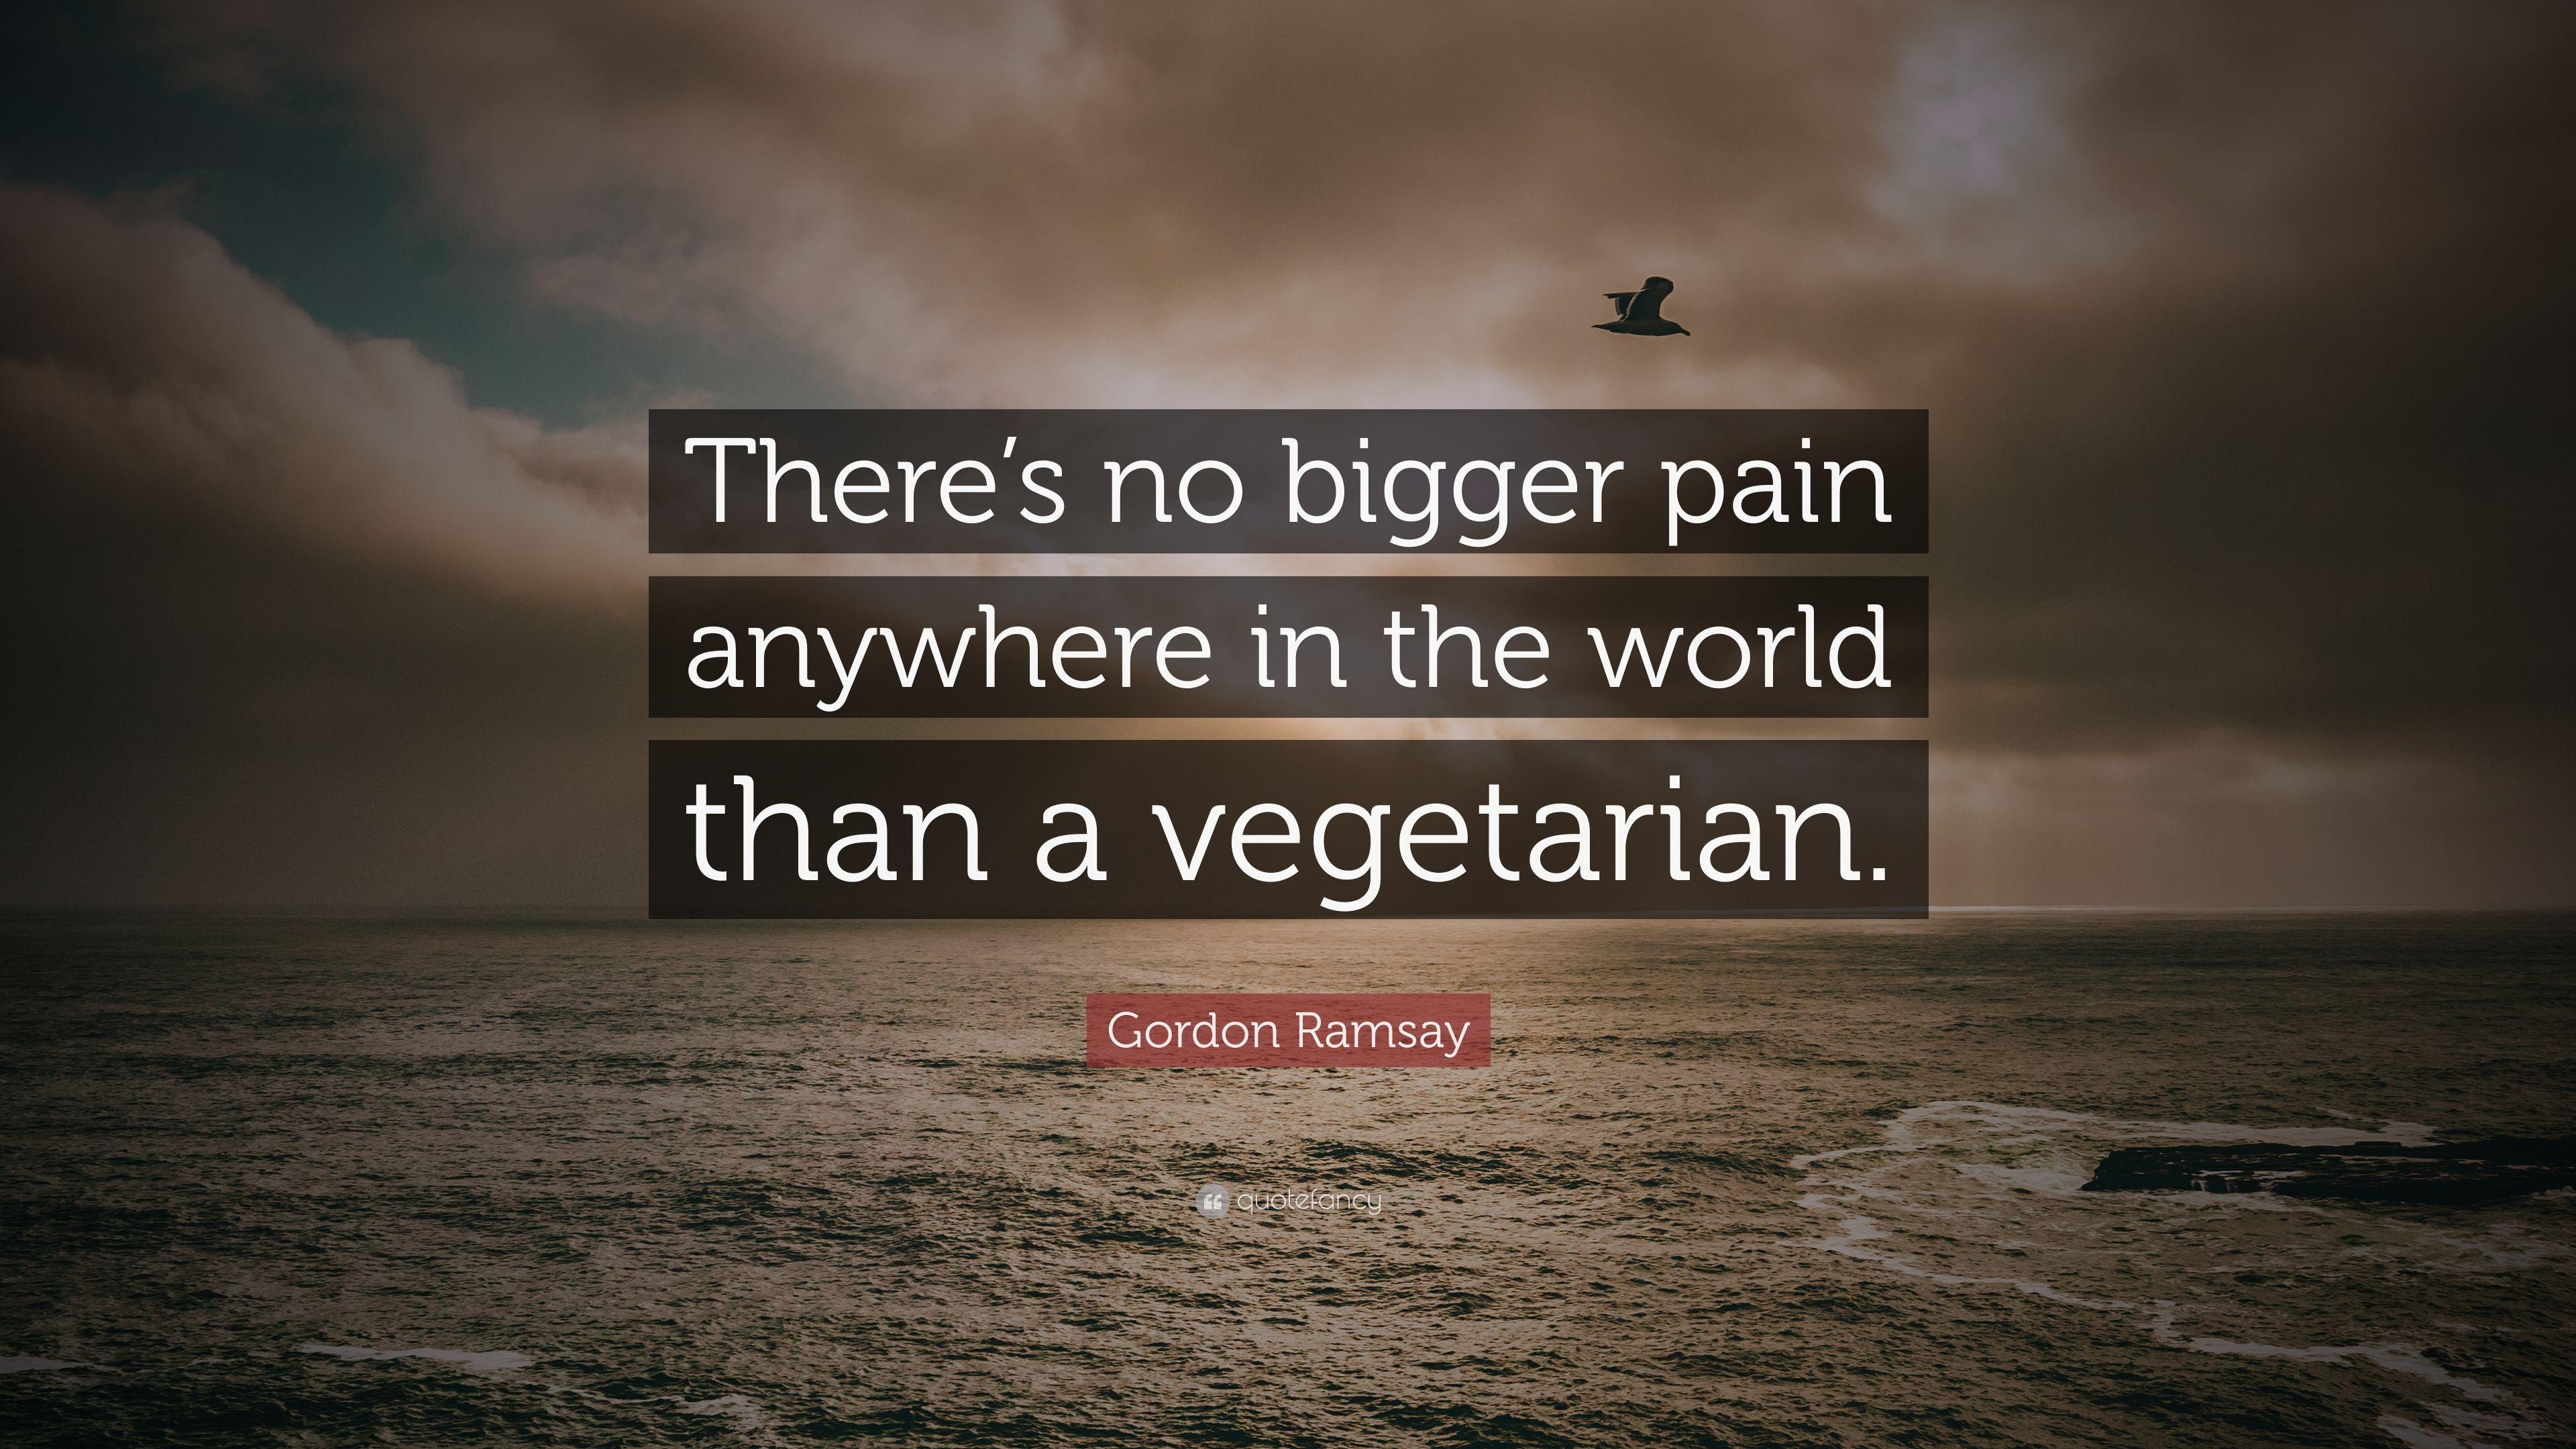 Gordon Ramsay Quote: "There's no bigger pain anywhere in the worl...